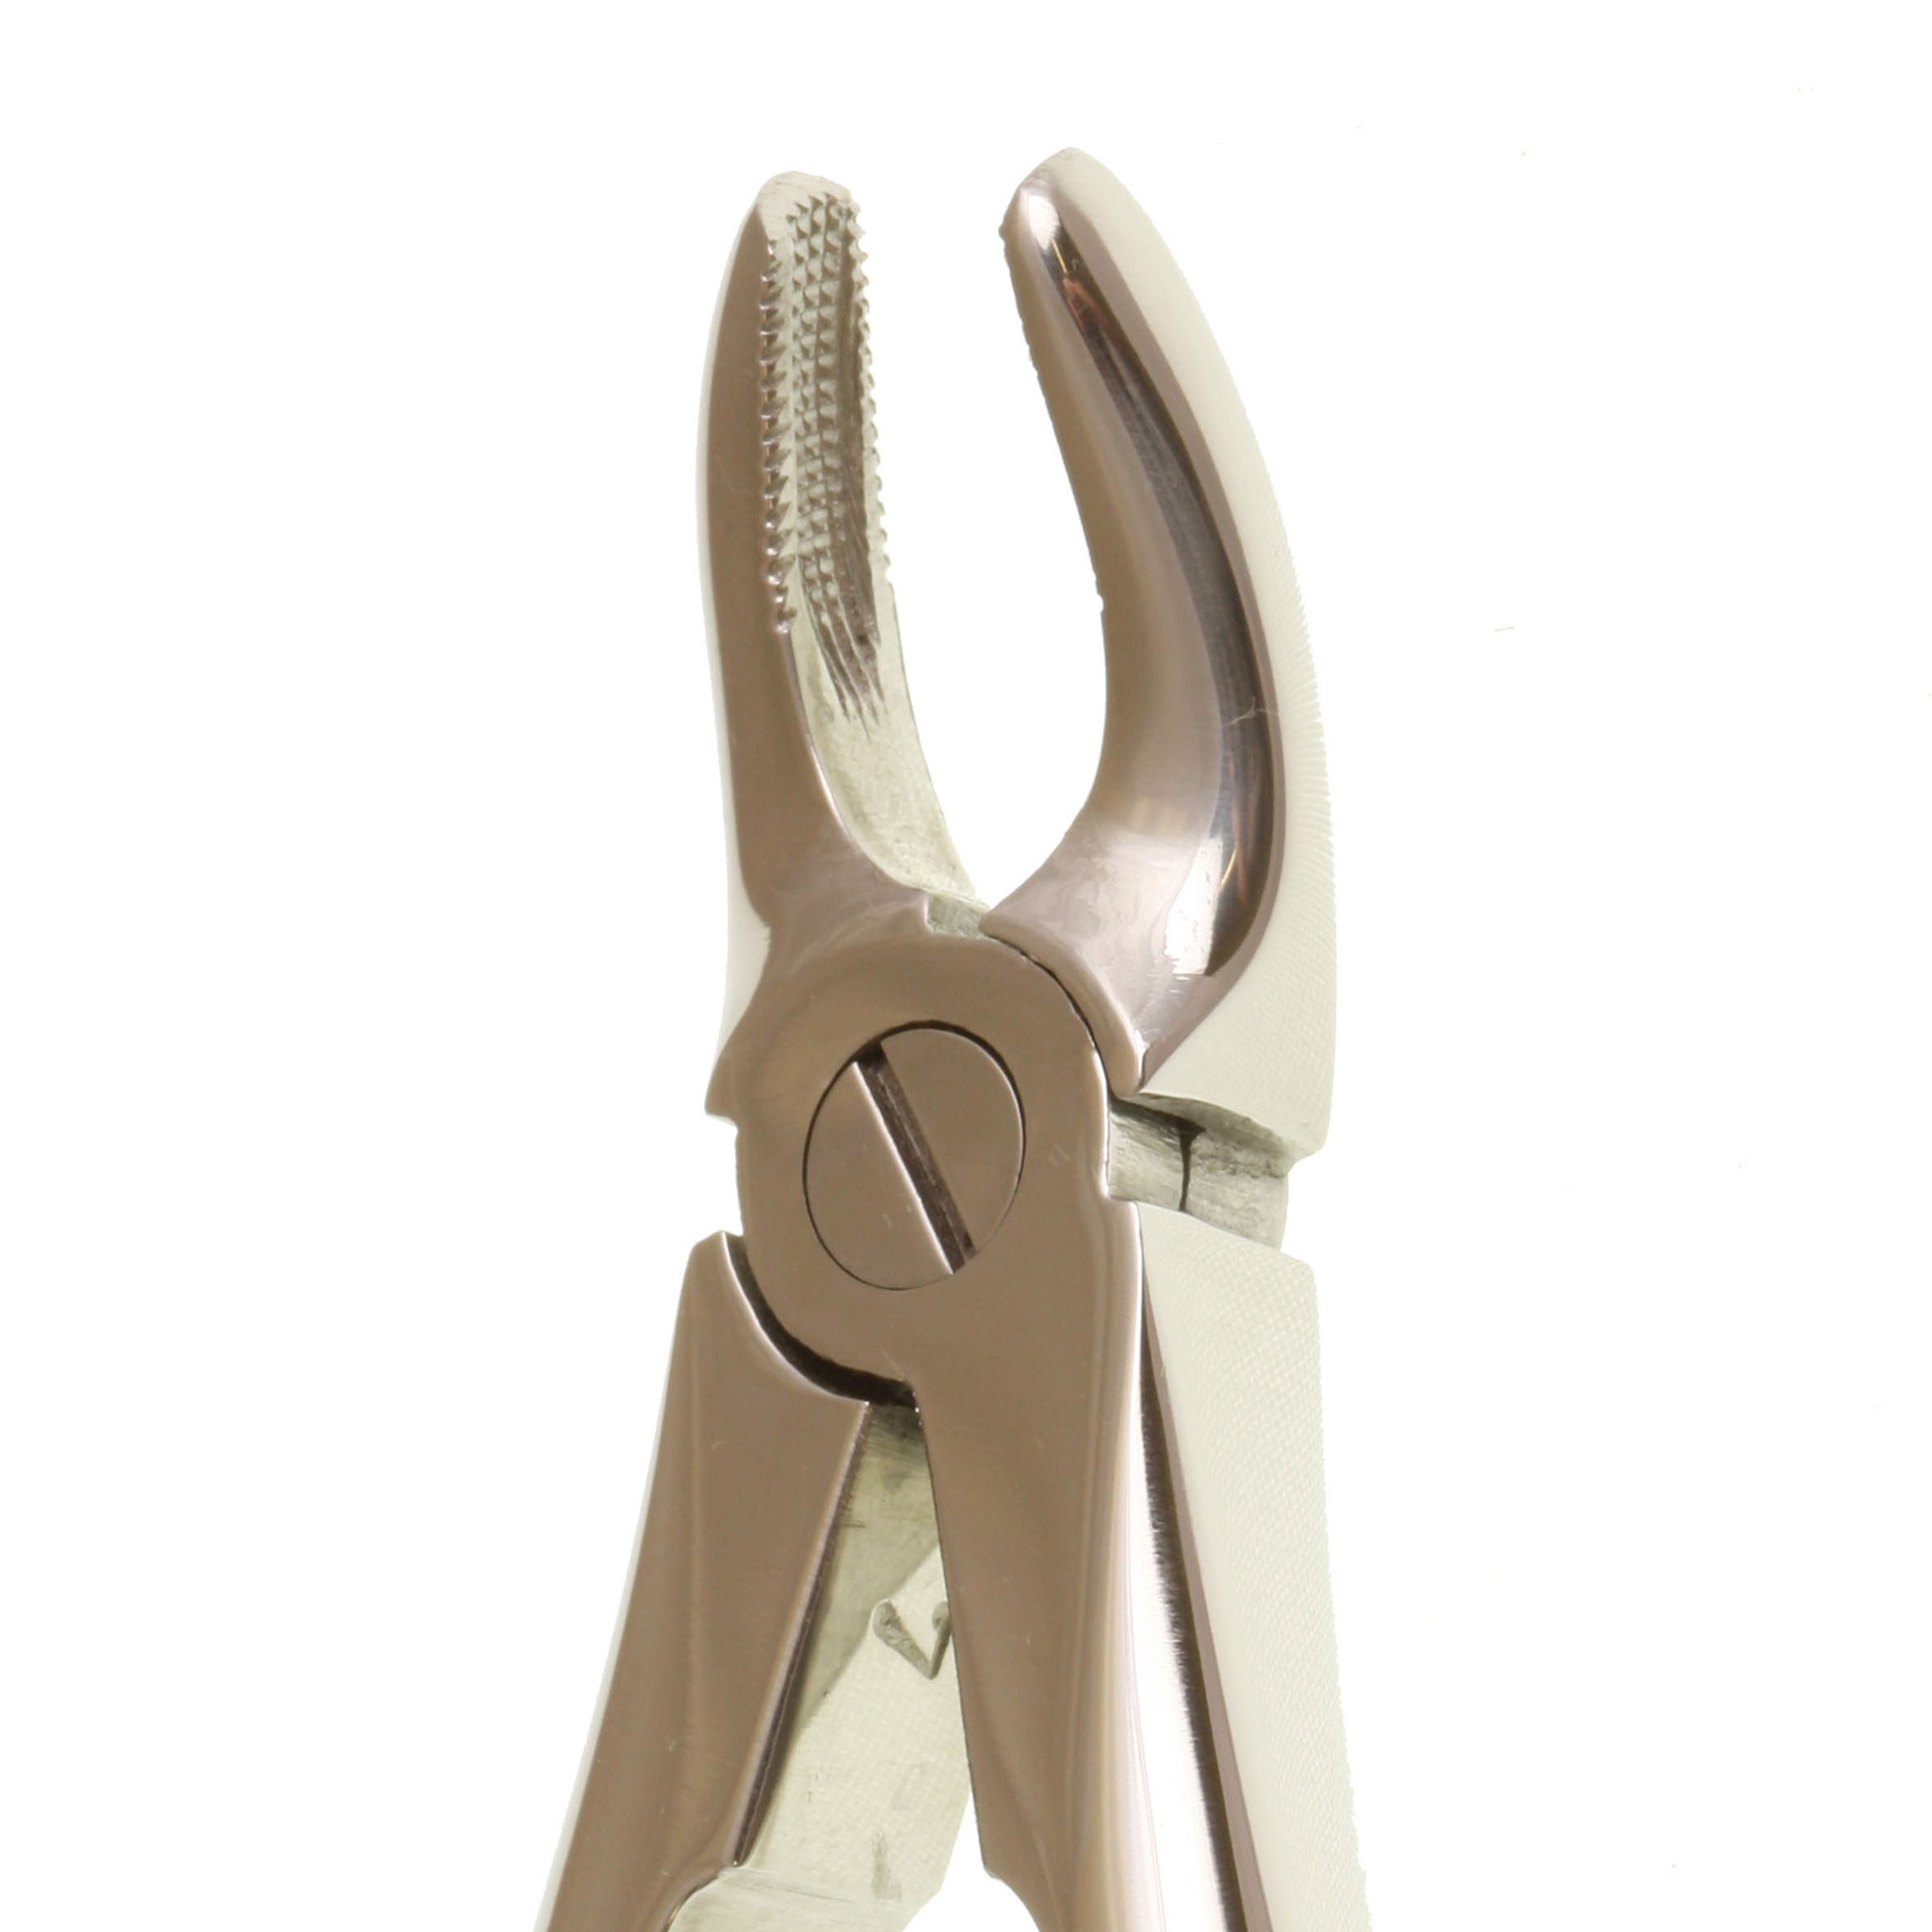 Eco+ Extraction Forceps No 139